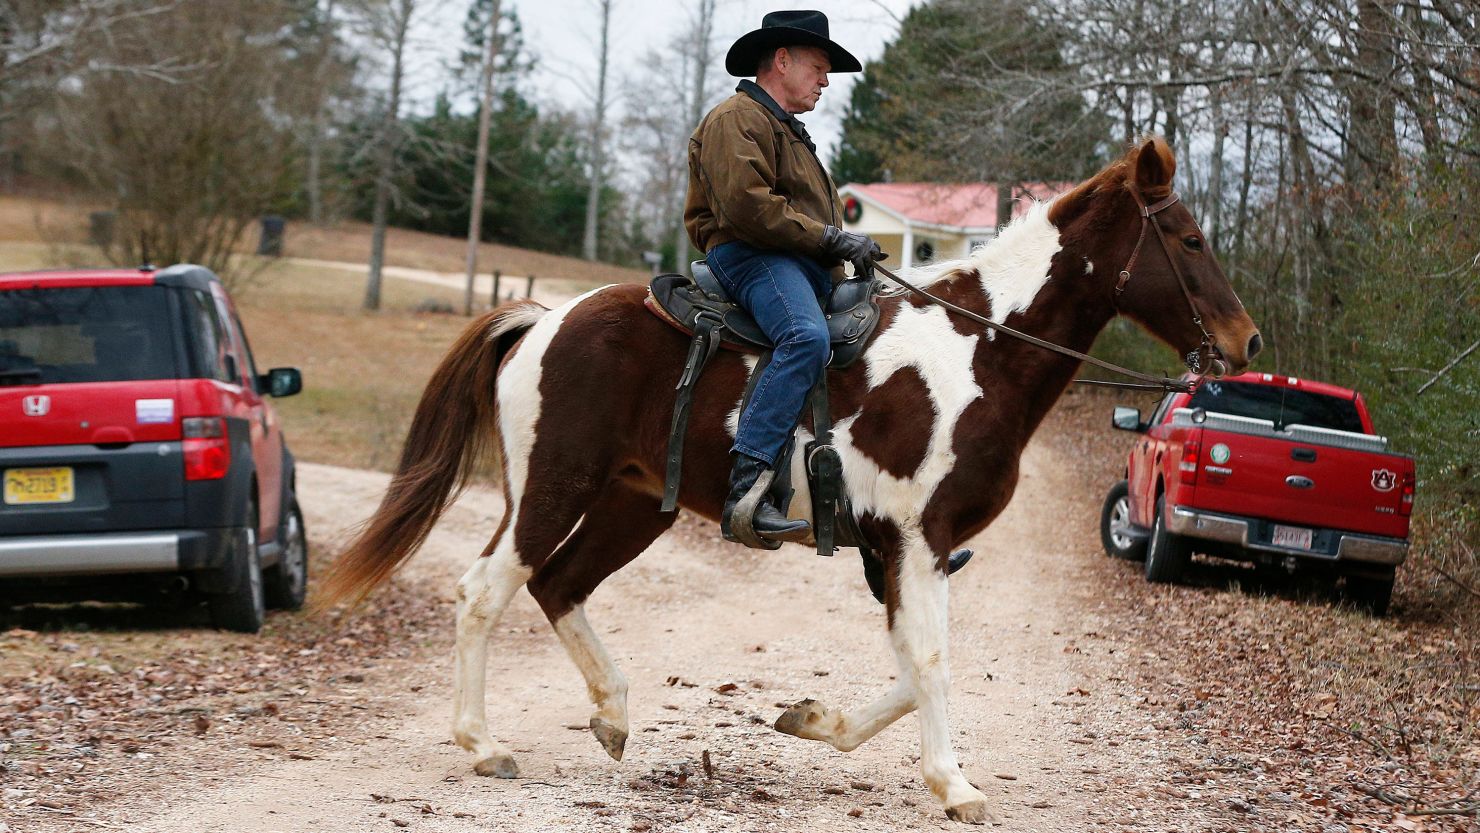 Roy Moore rides a horse to vote on December 12, 2017, in Gallant, Alabama.